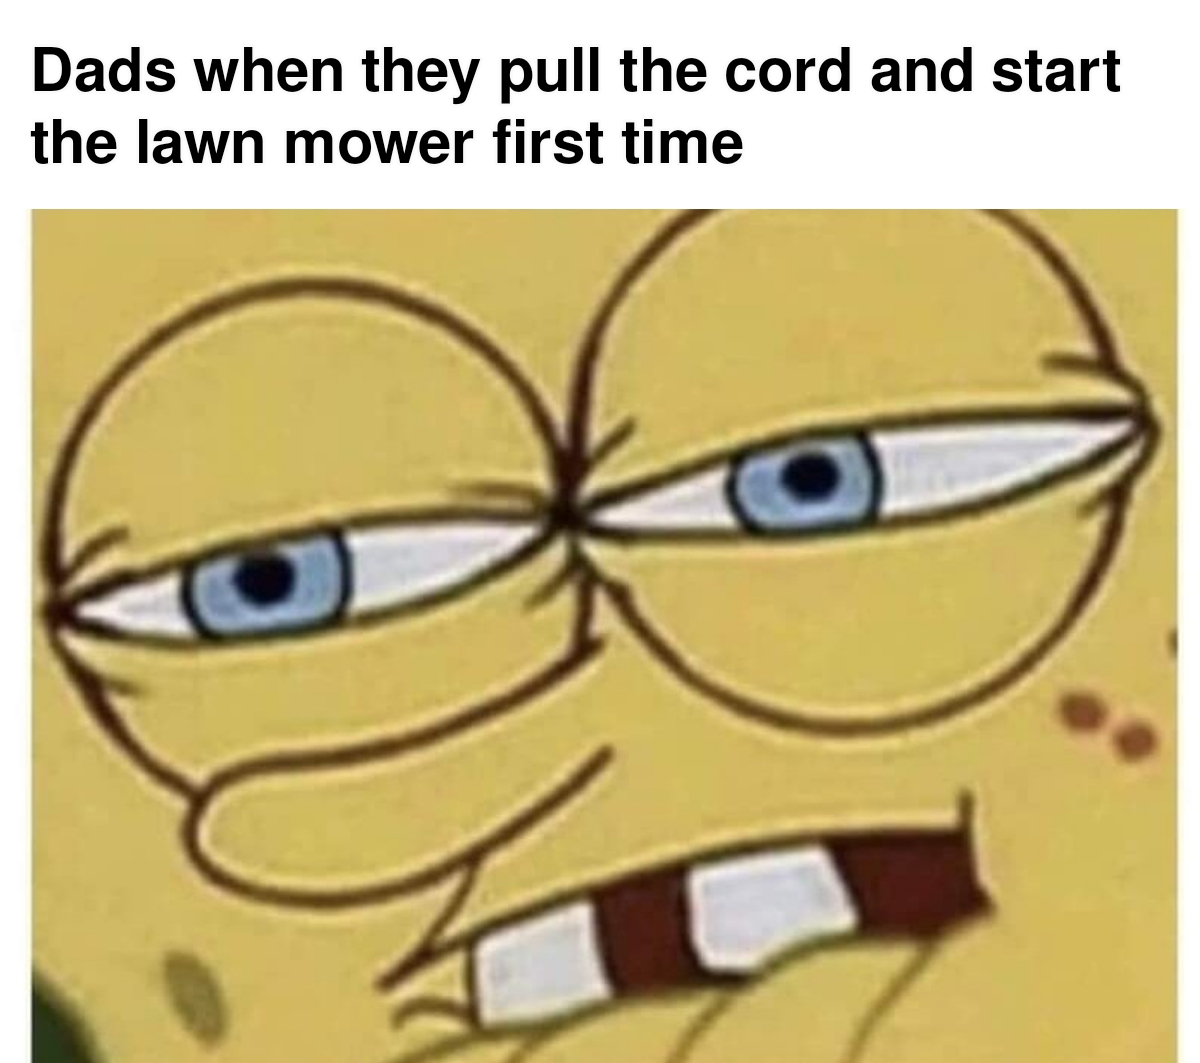 monday morning randomness - you push the vacuum cleaner meme - Dads when they pull the cord and start the lawn mower first time